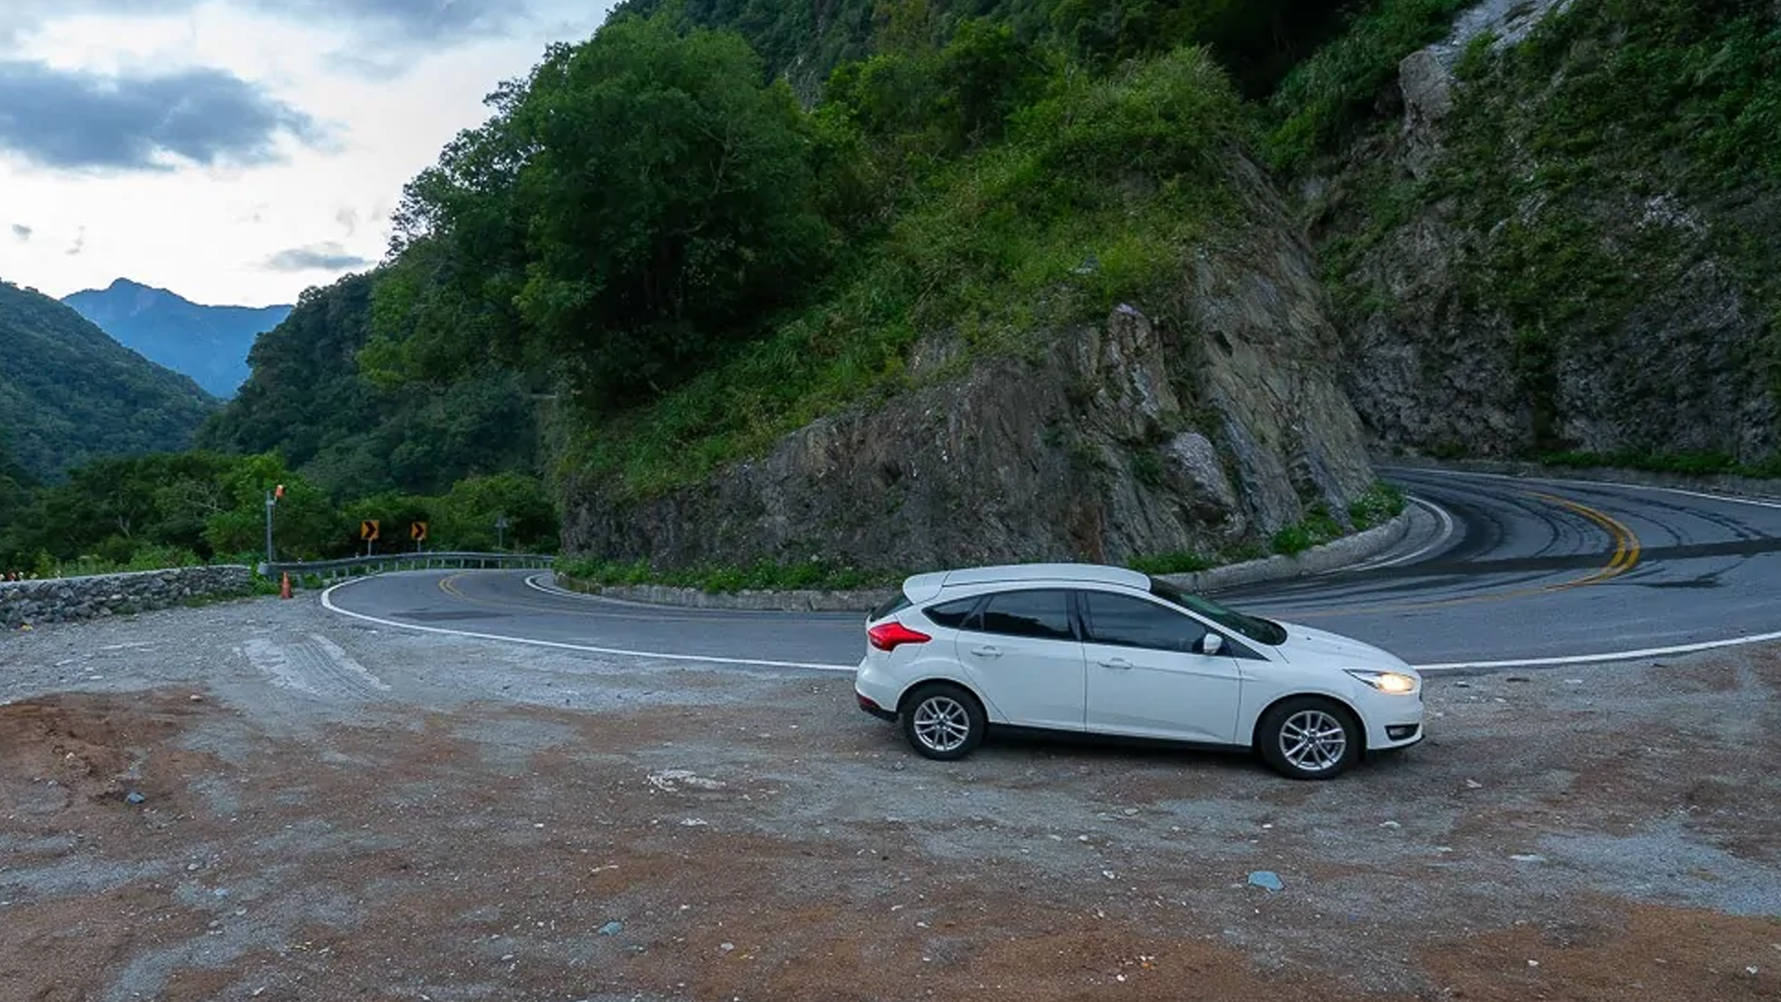 Drive in Style Gharry Adventures with Taiwan’s Finest Car Rentals